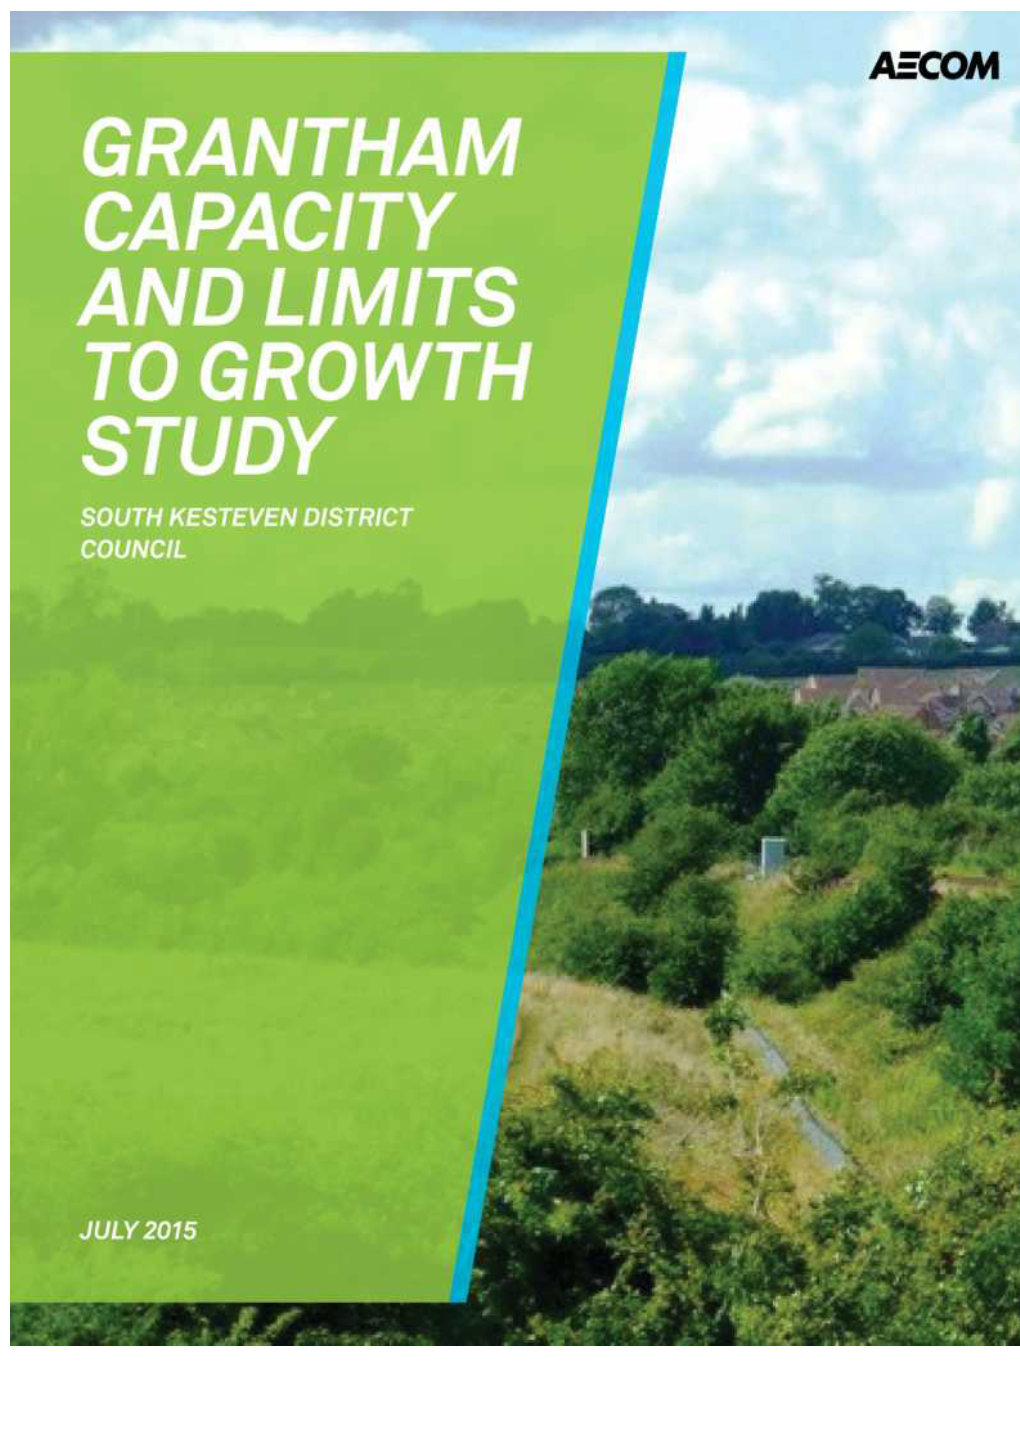 Grantham Capacity and Limits to Growth Study July 2015 AECOM Grantham Capacity and 2 Limits to Growth Study